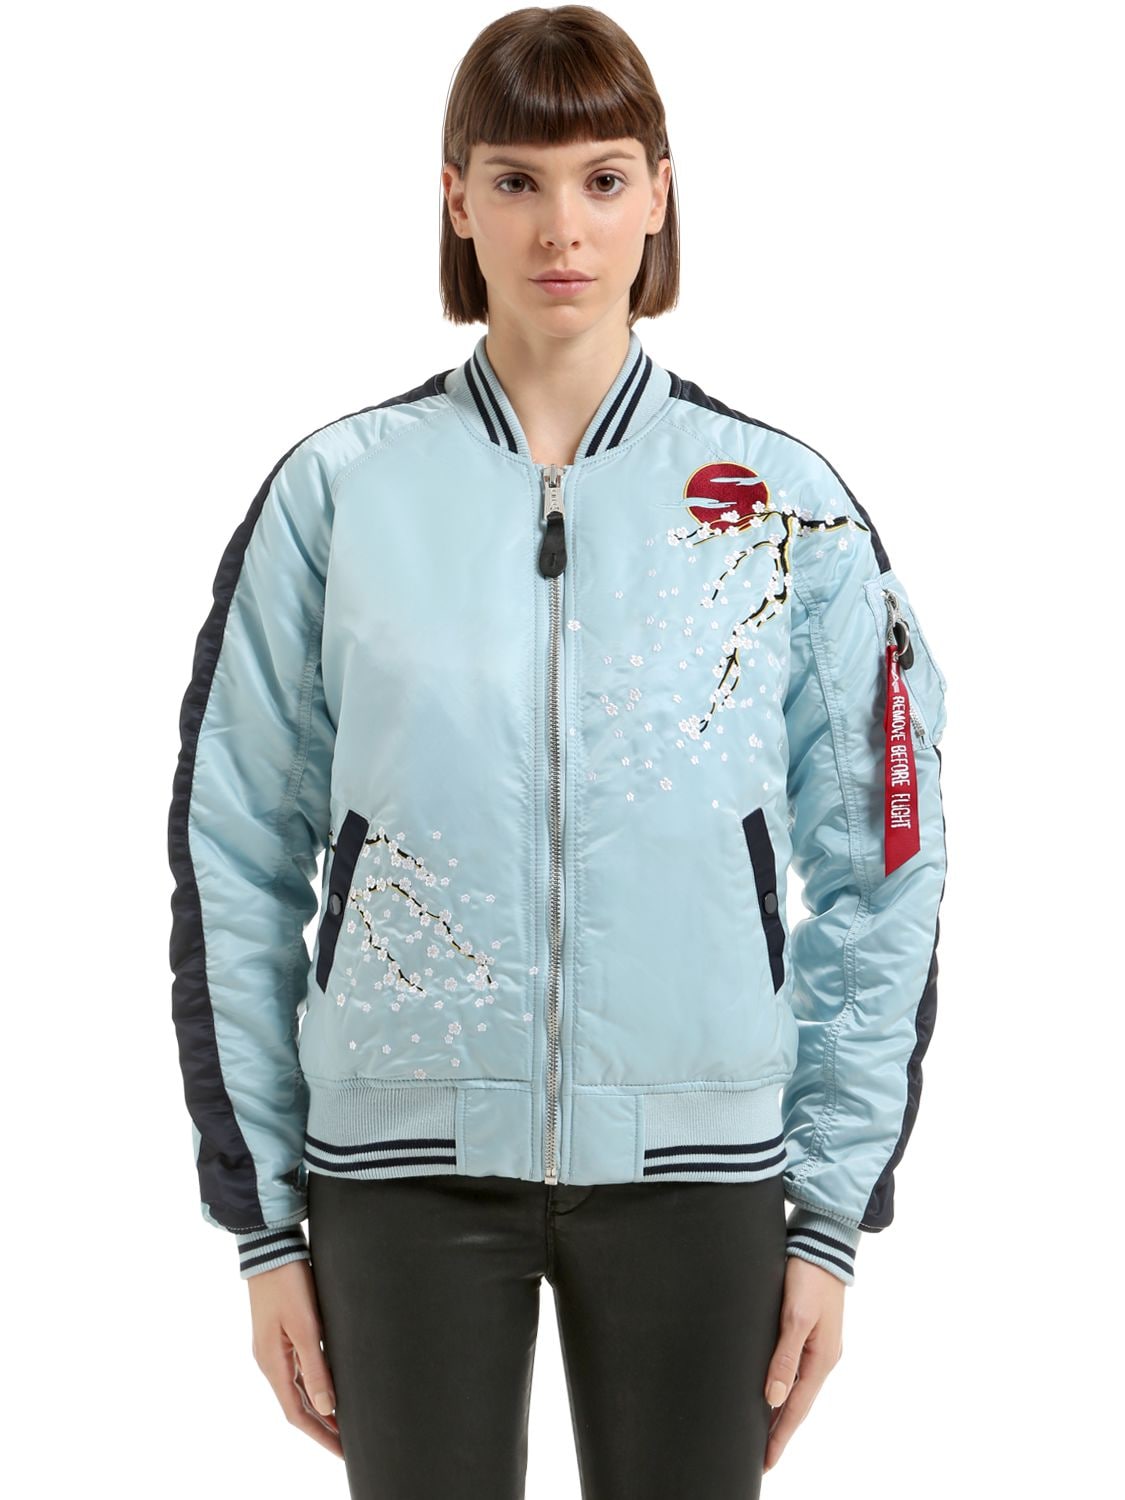 ALPHA INDUSTRIES FLORAL EMBROIDERED NYLON BOMBER JACKET,66IW3X015-MZK40